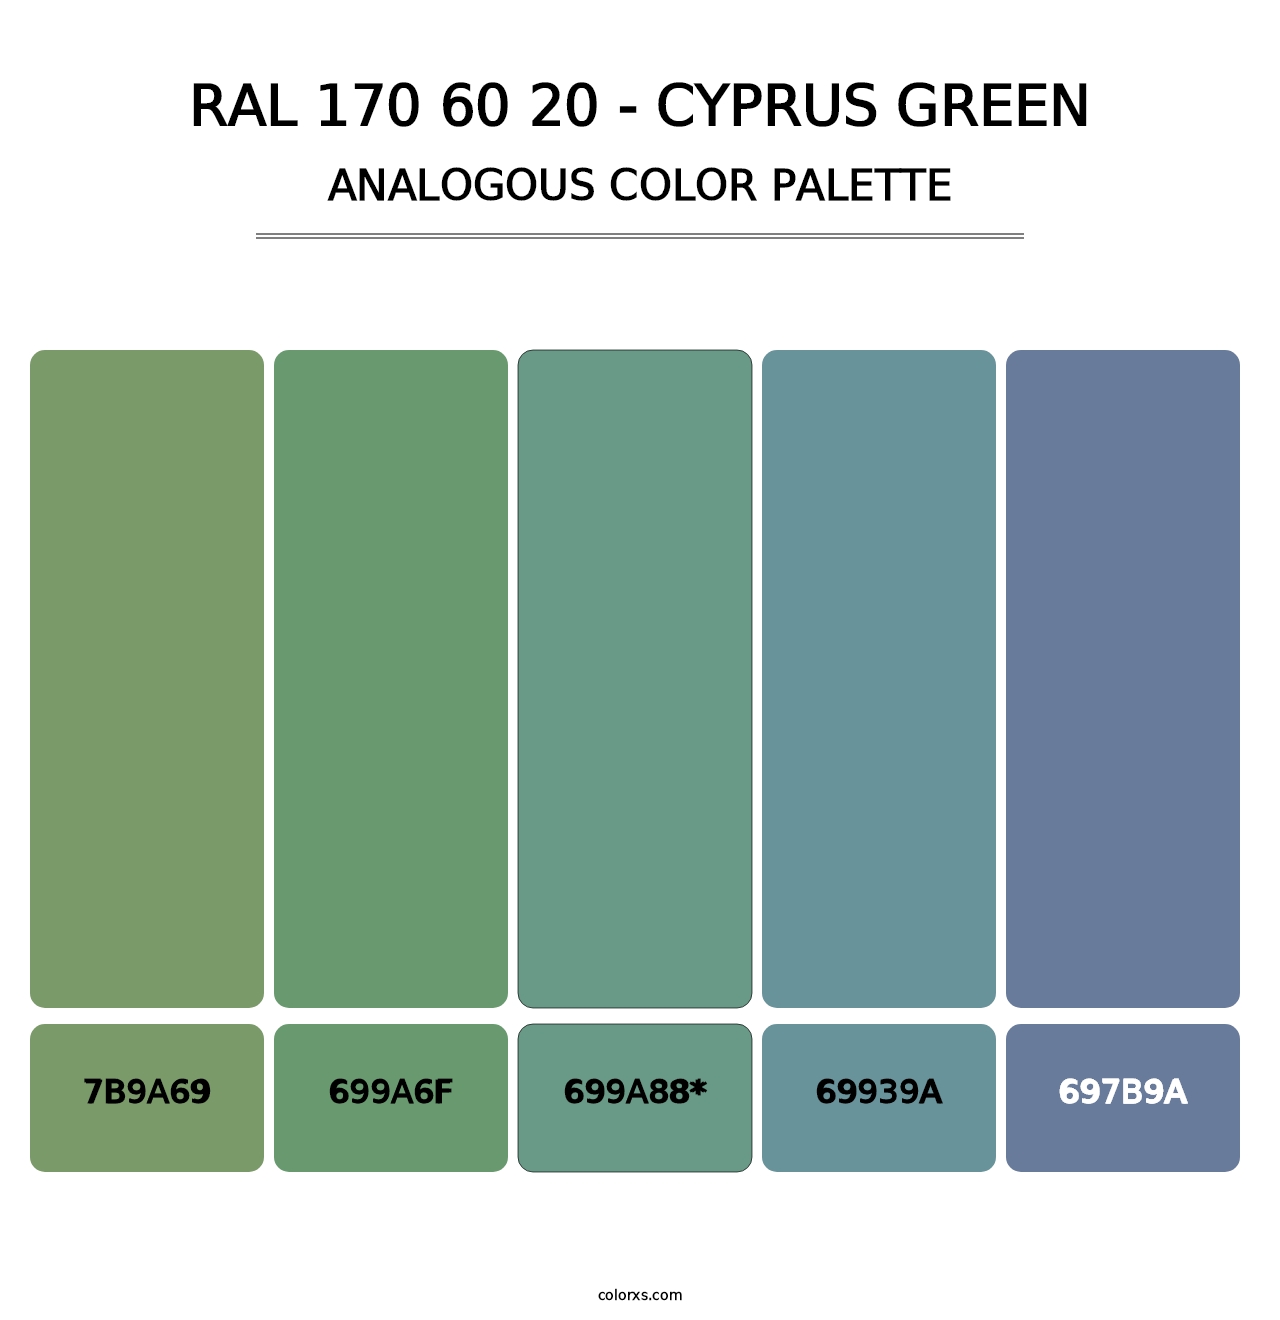 RAL 170 60 20 - Cyprus Green - Analogous Color Palette